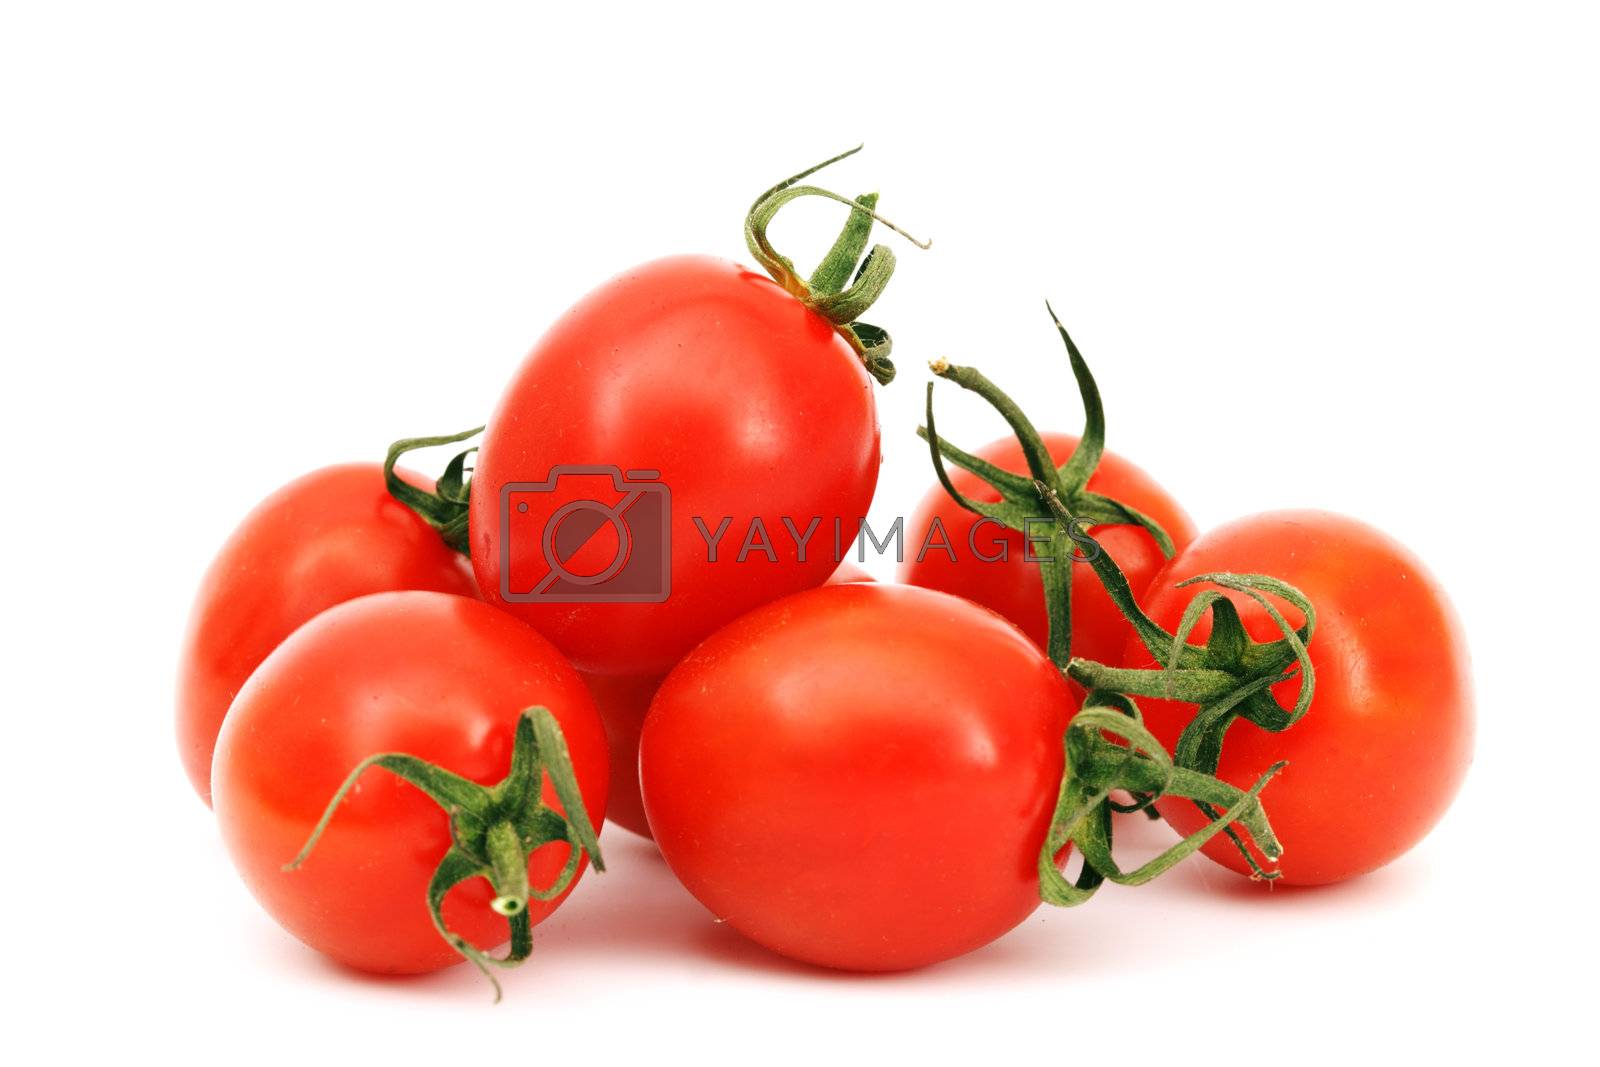 Royalty free image of cherry tomato by Yellowj